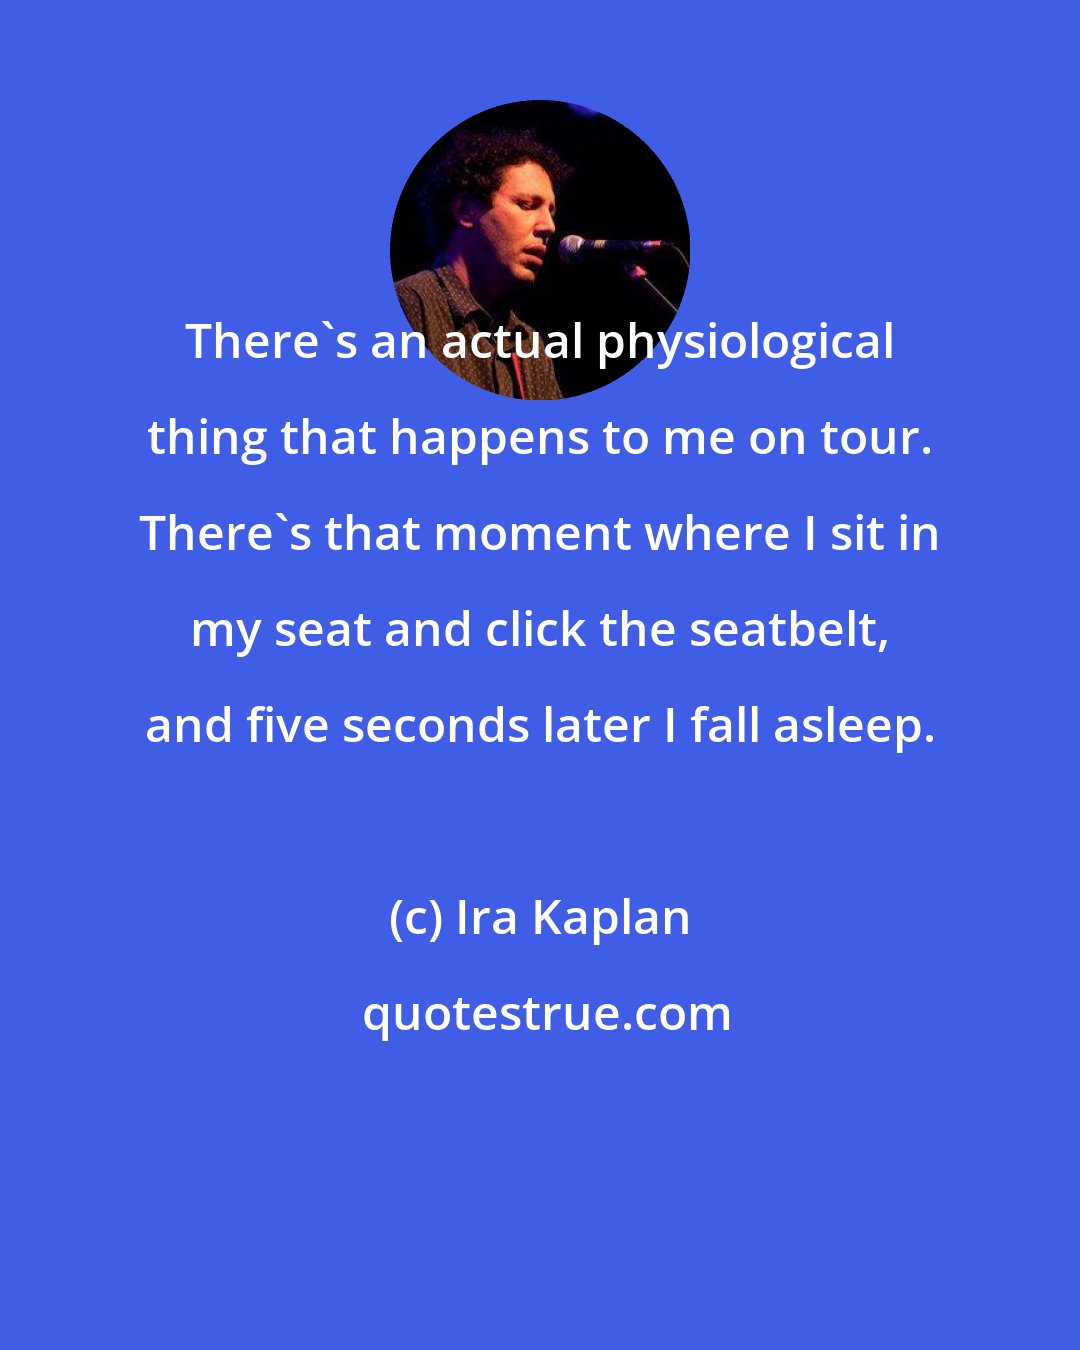 Ira Kaplan: There's an actual physiological thing that happens to me on tour. There's that moment where I sit in my seat and click the seatbelt, and five seconds later I fall asleep.